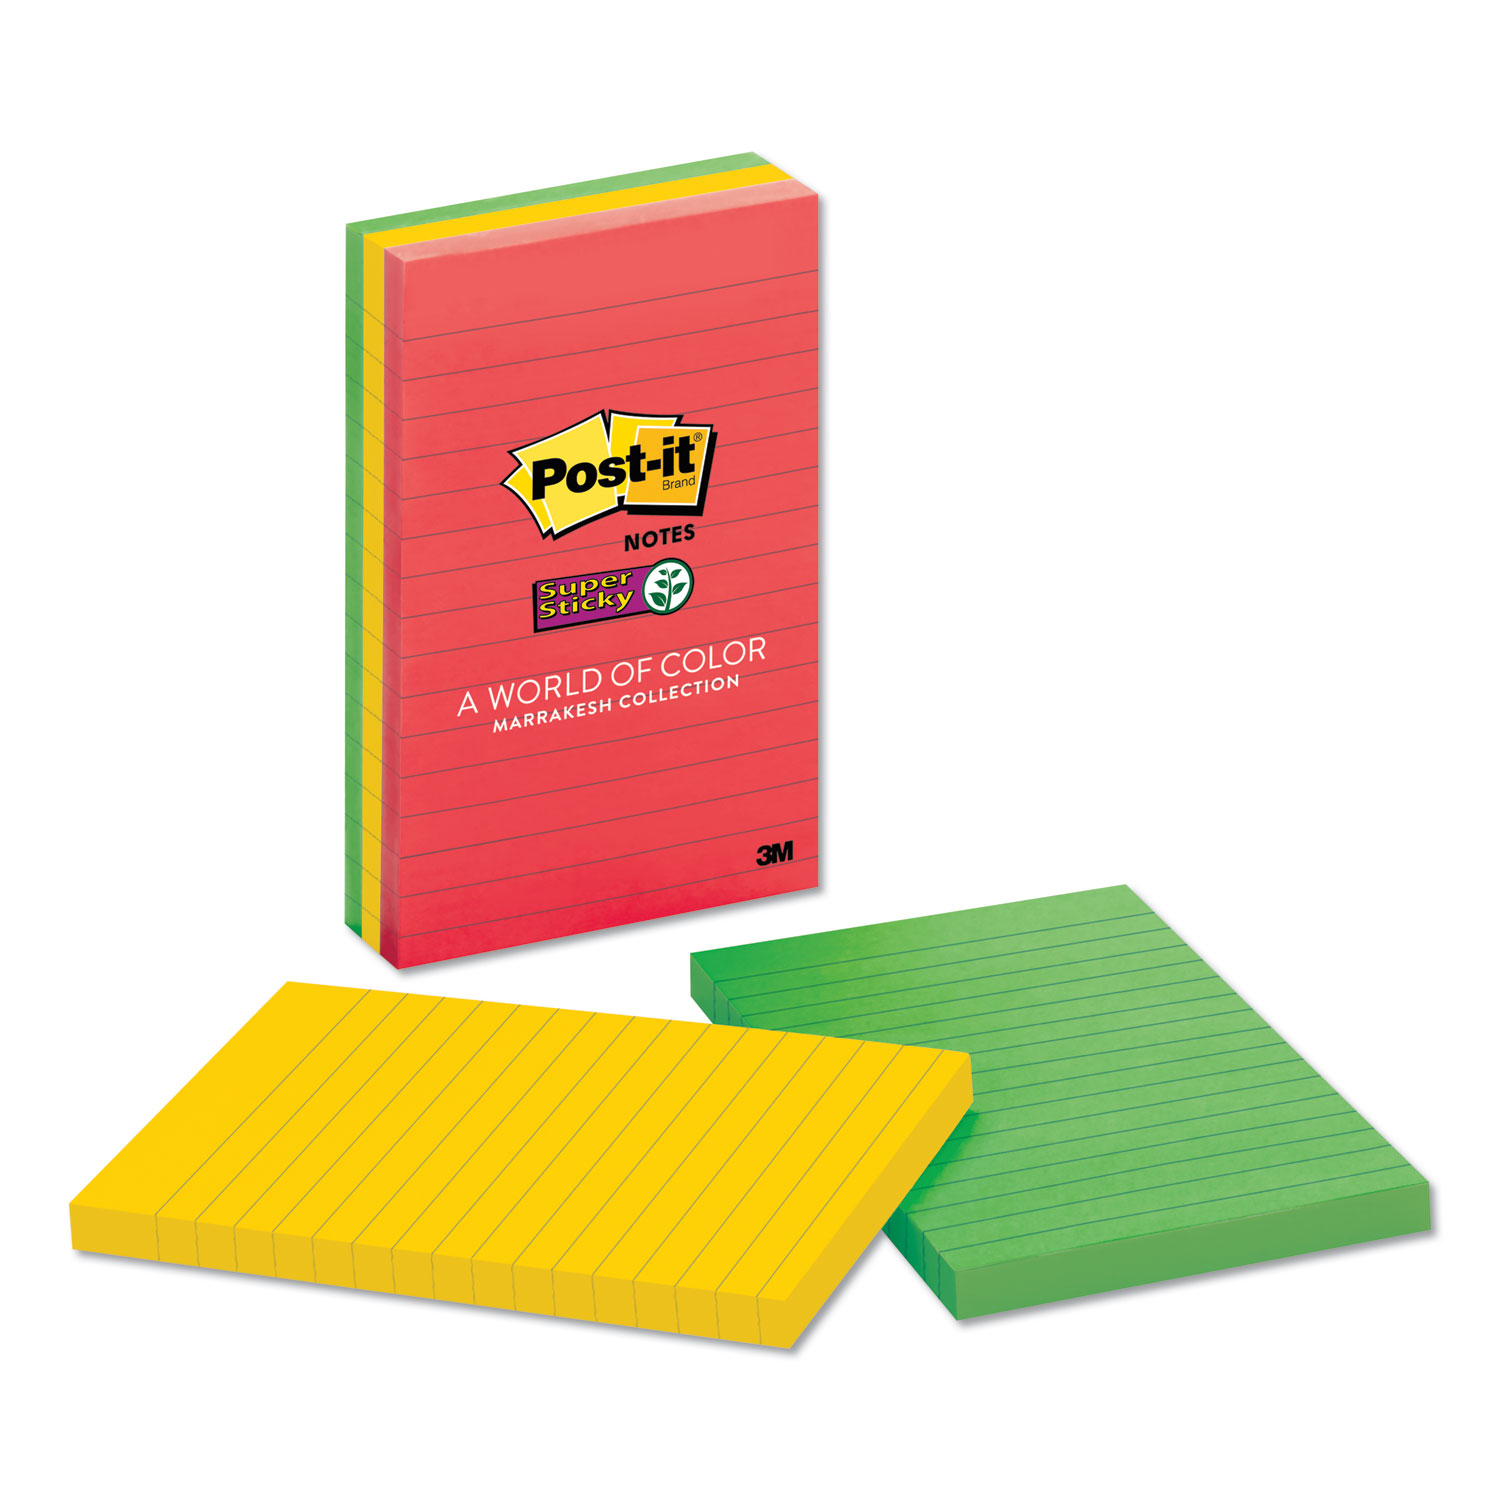  Post-it Notes Super Sticky 660-3SSAN Pads in Marrakesh Colors, Lined, 4 x 6, 90-Sheet, 3/Pack (MMM6603SSAN) 